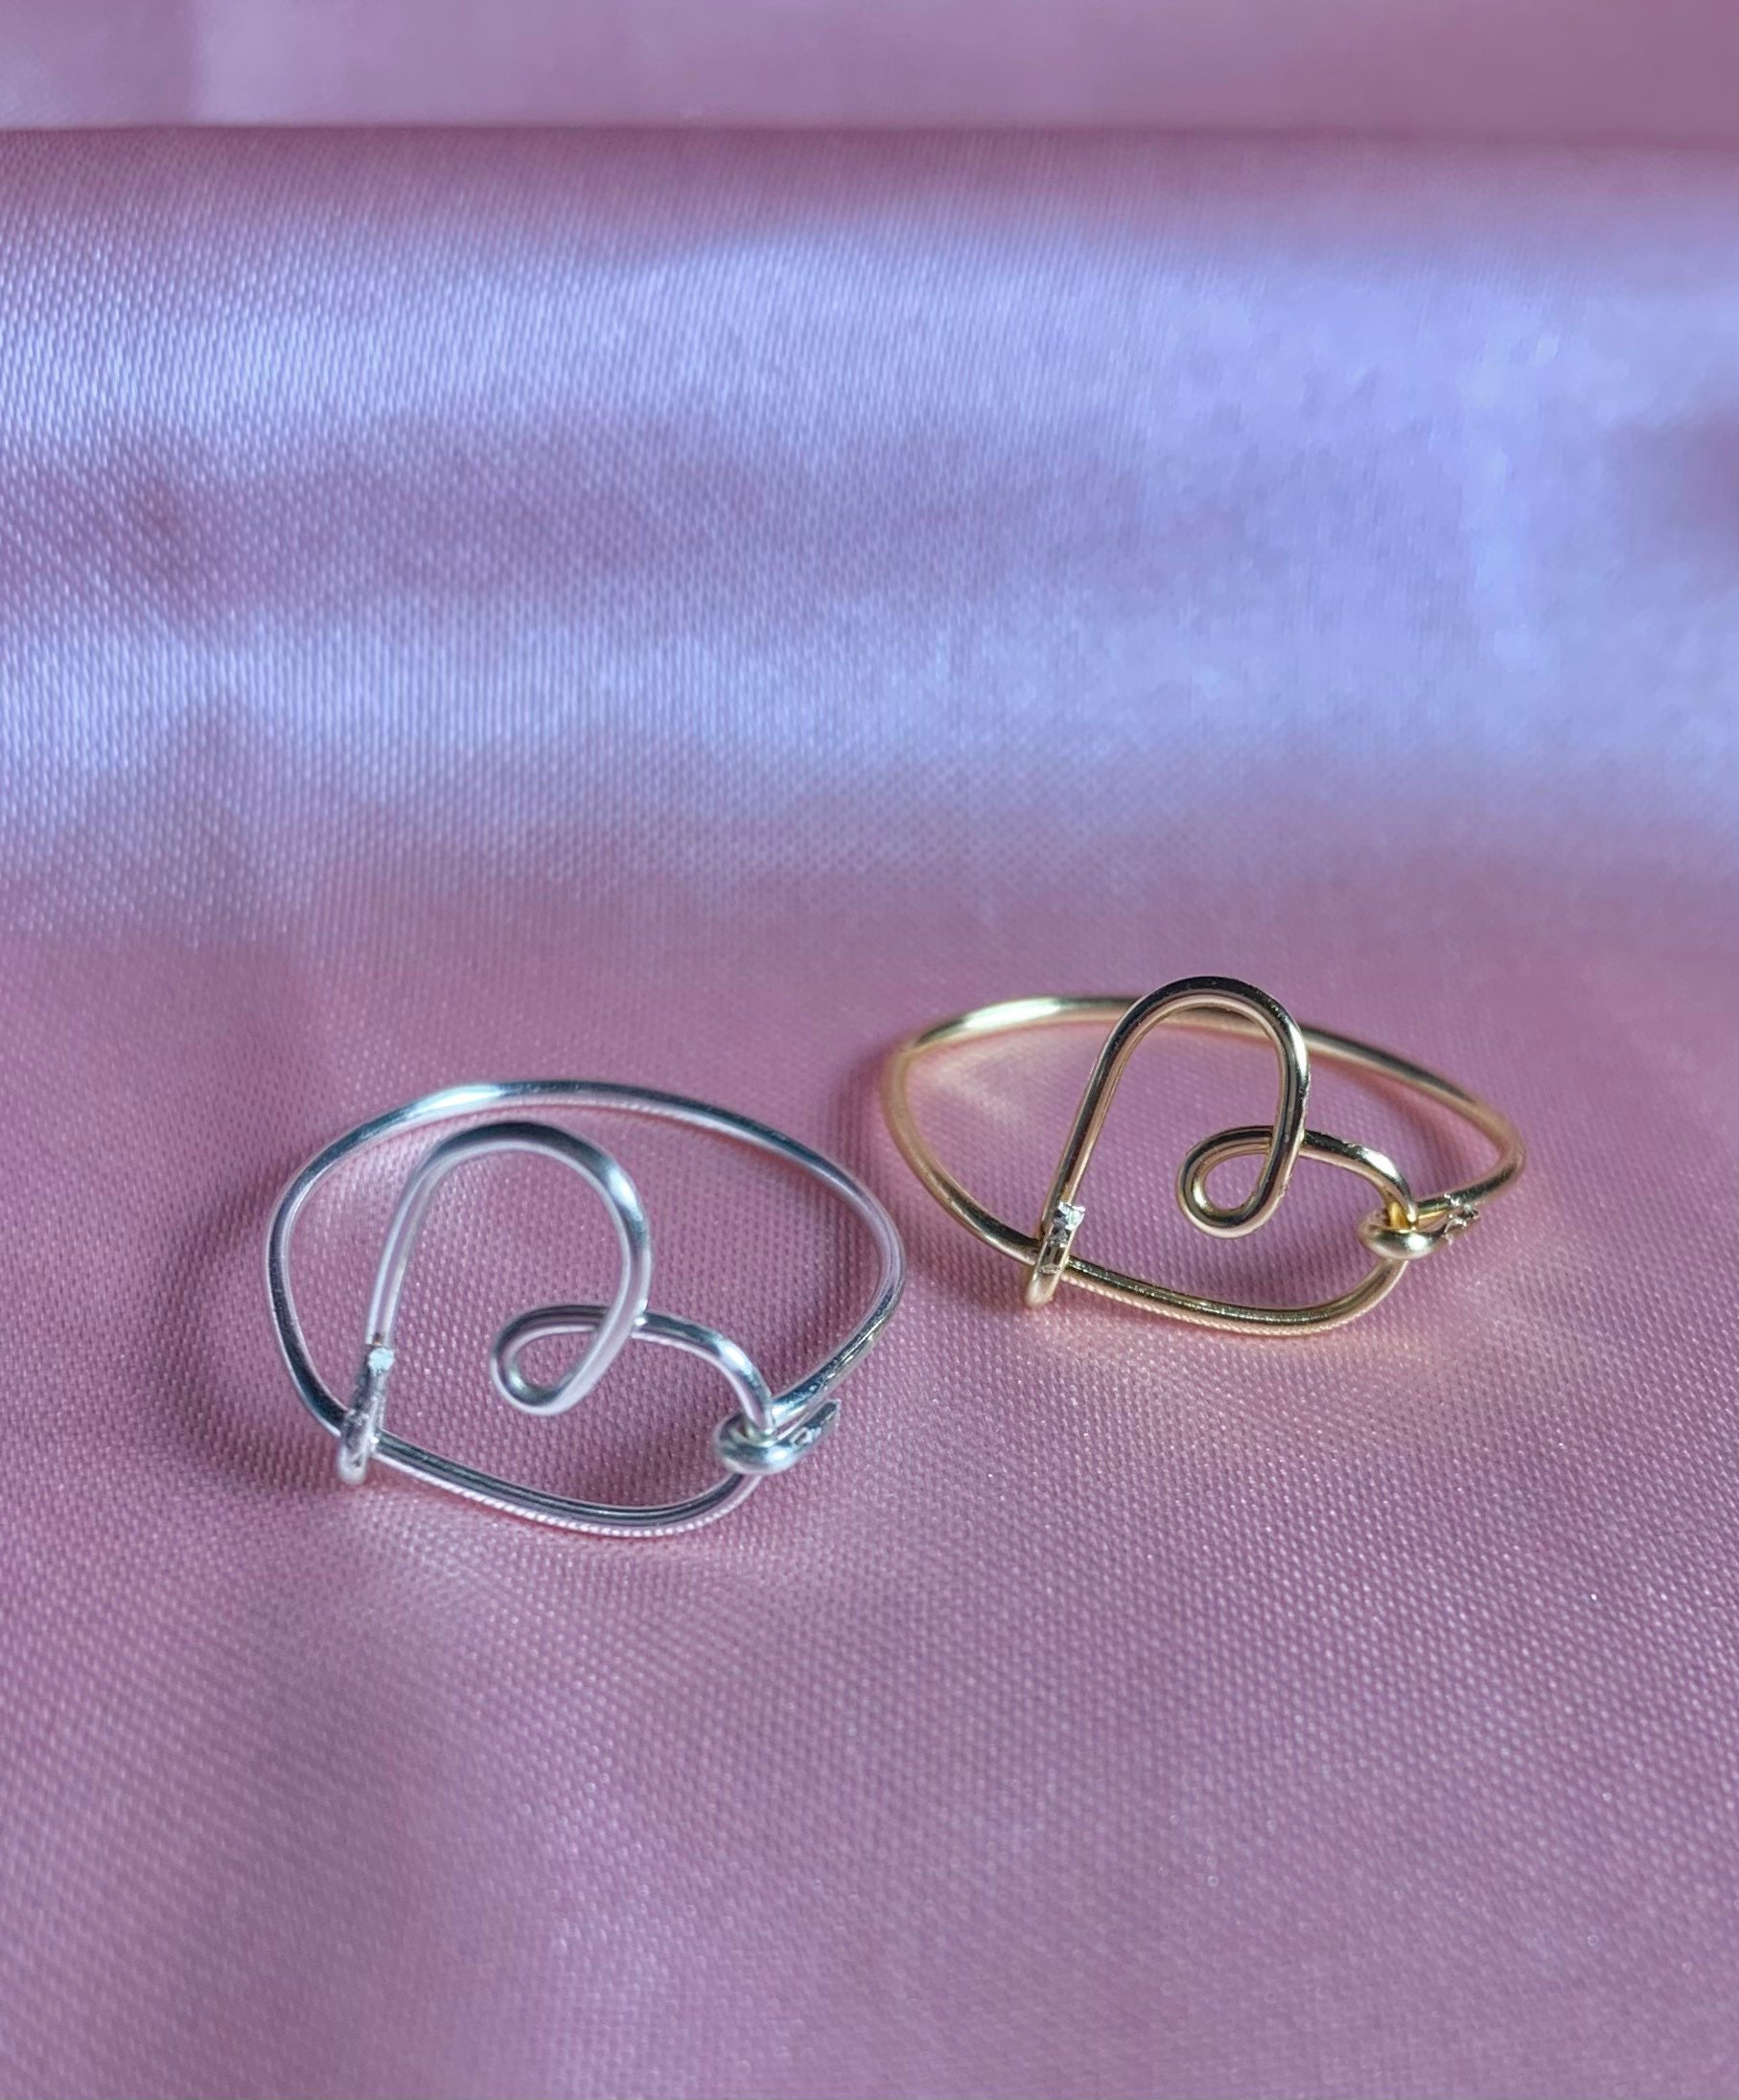 Gold & sliver heart wire rings | Etsy